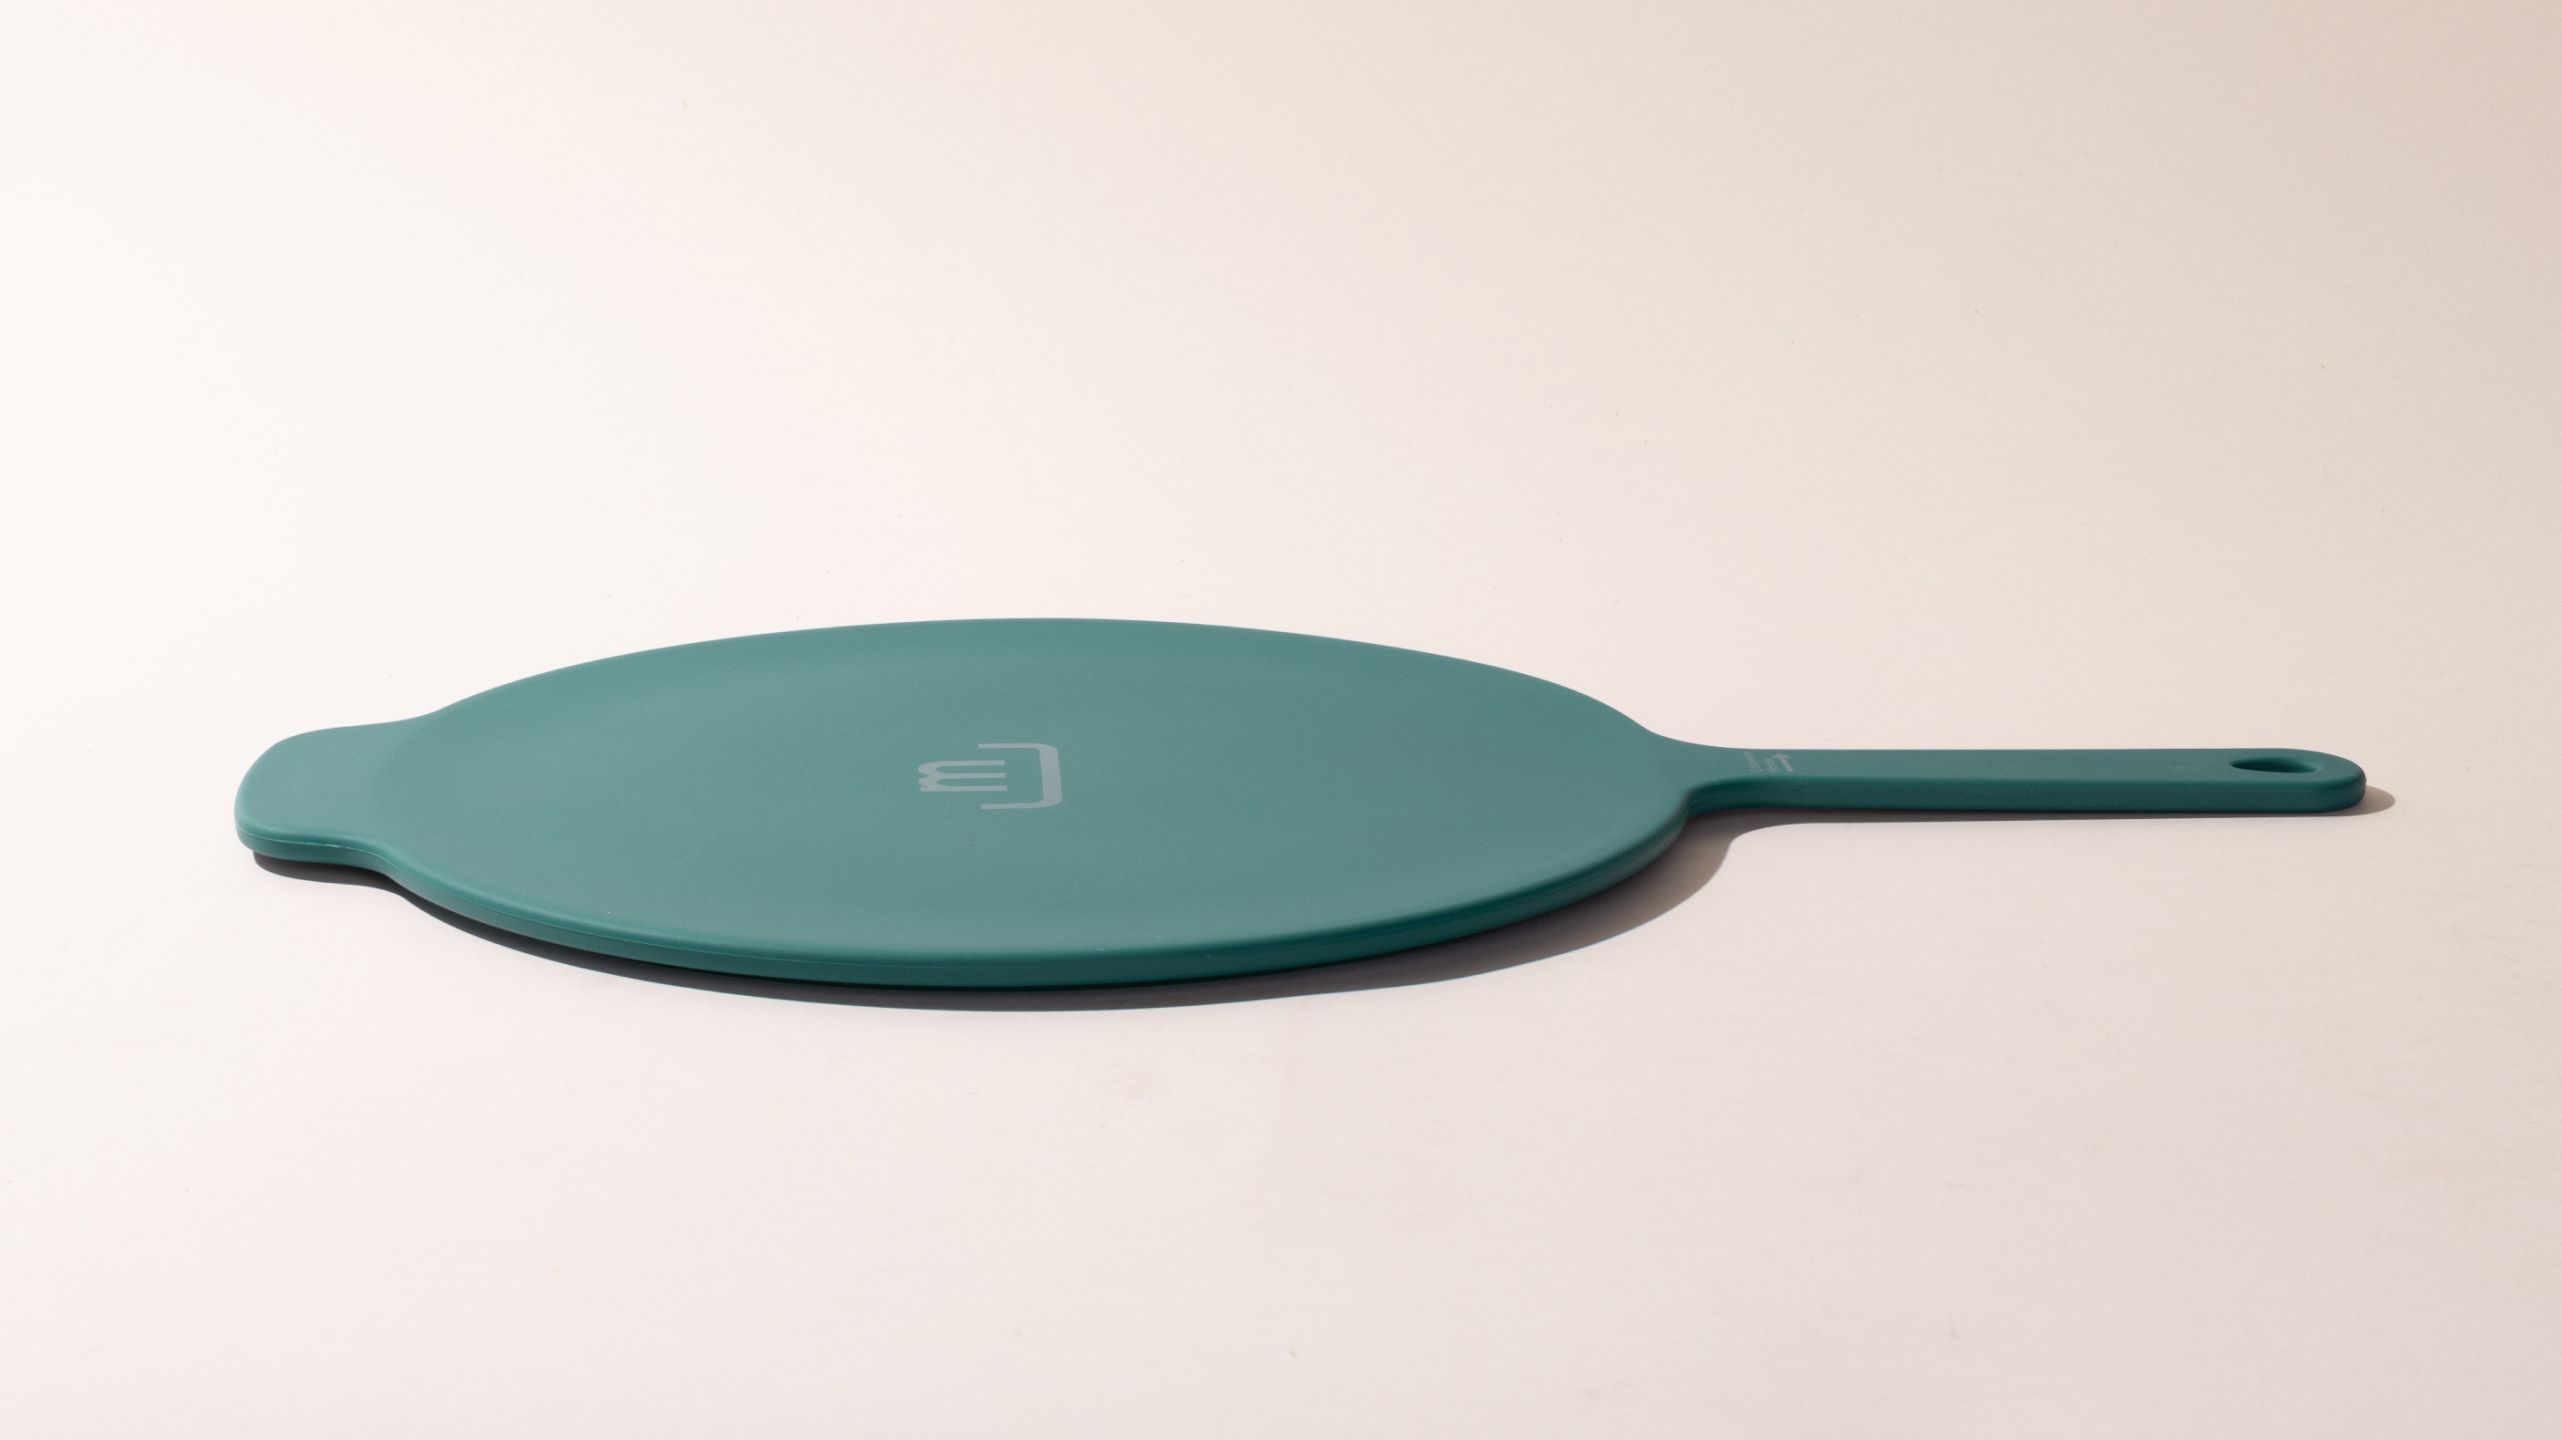 Best Universal Frying Pan Lid | Blue Silicone | Lifetime Warranty | Made in